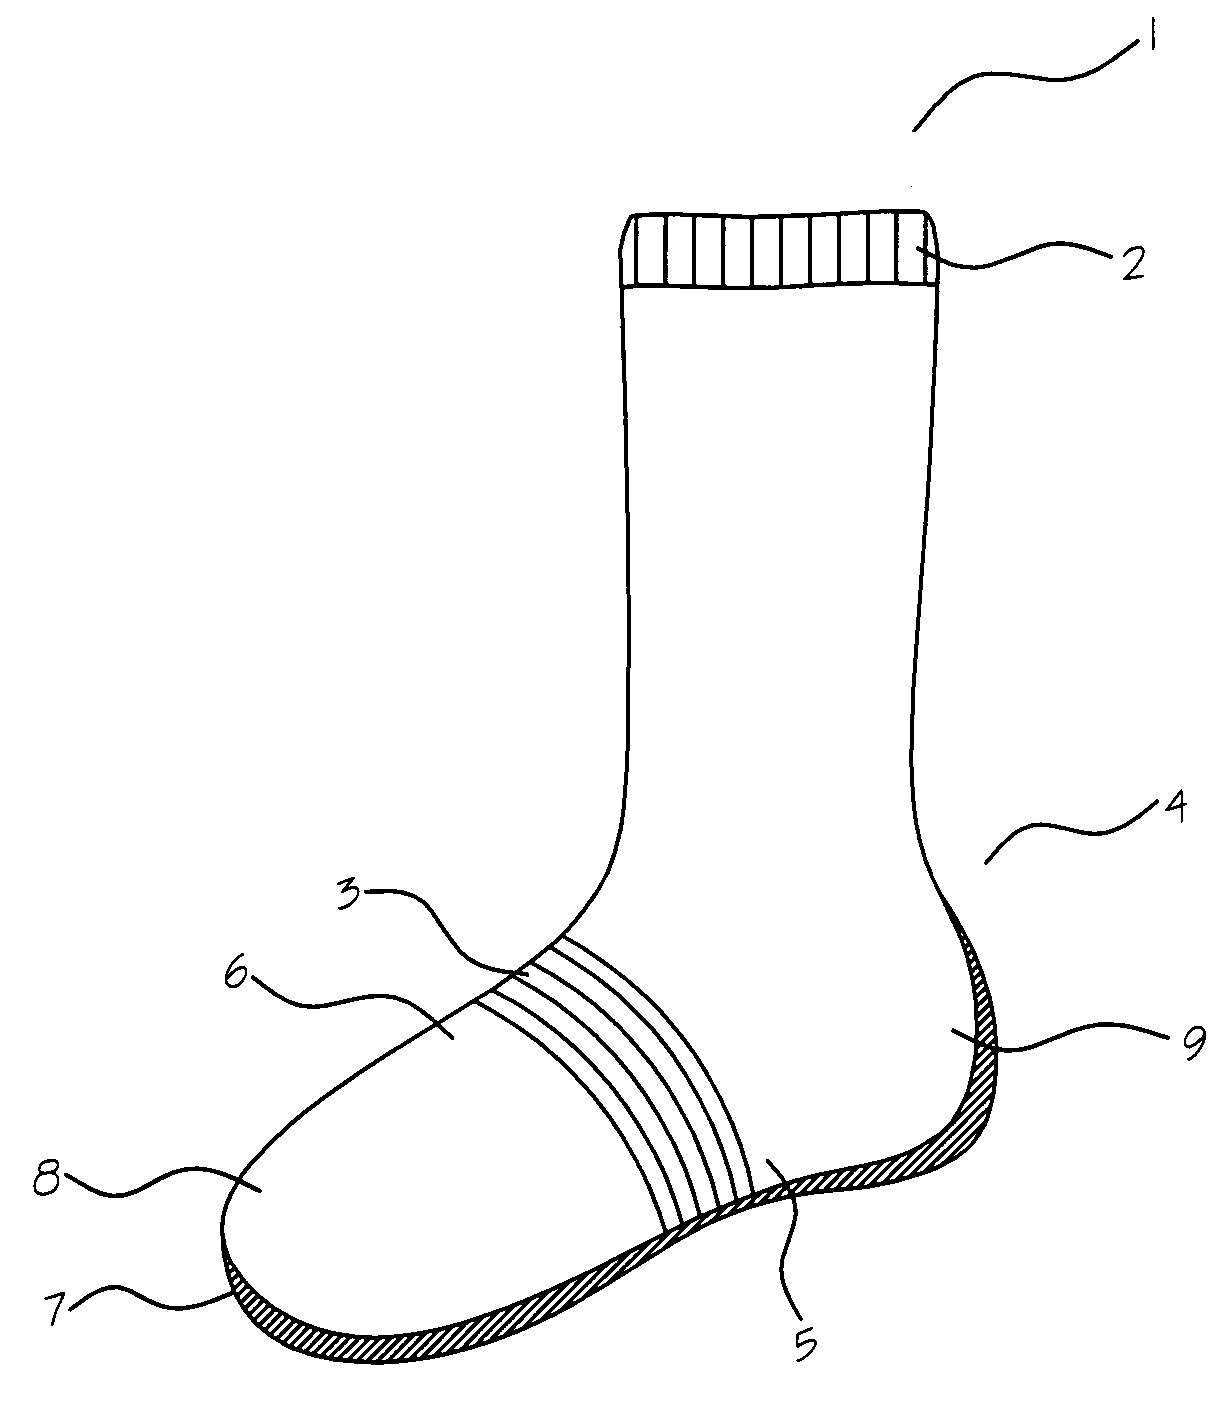 Method of producing porous nitrile rubber coated indoor athletic socks